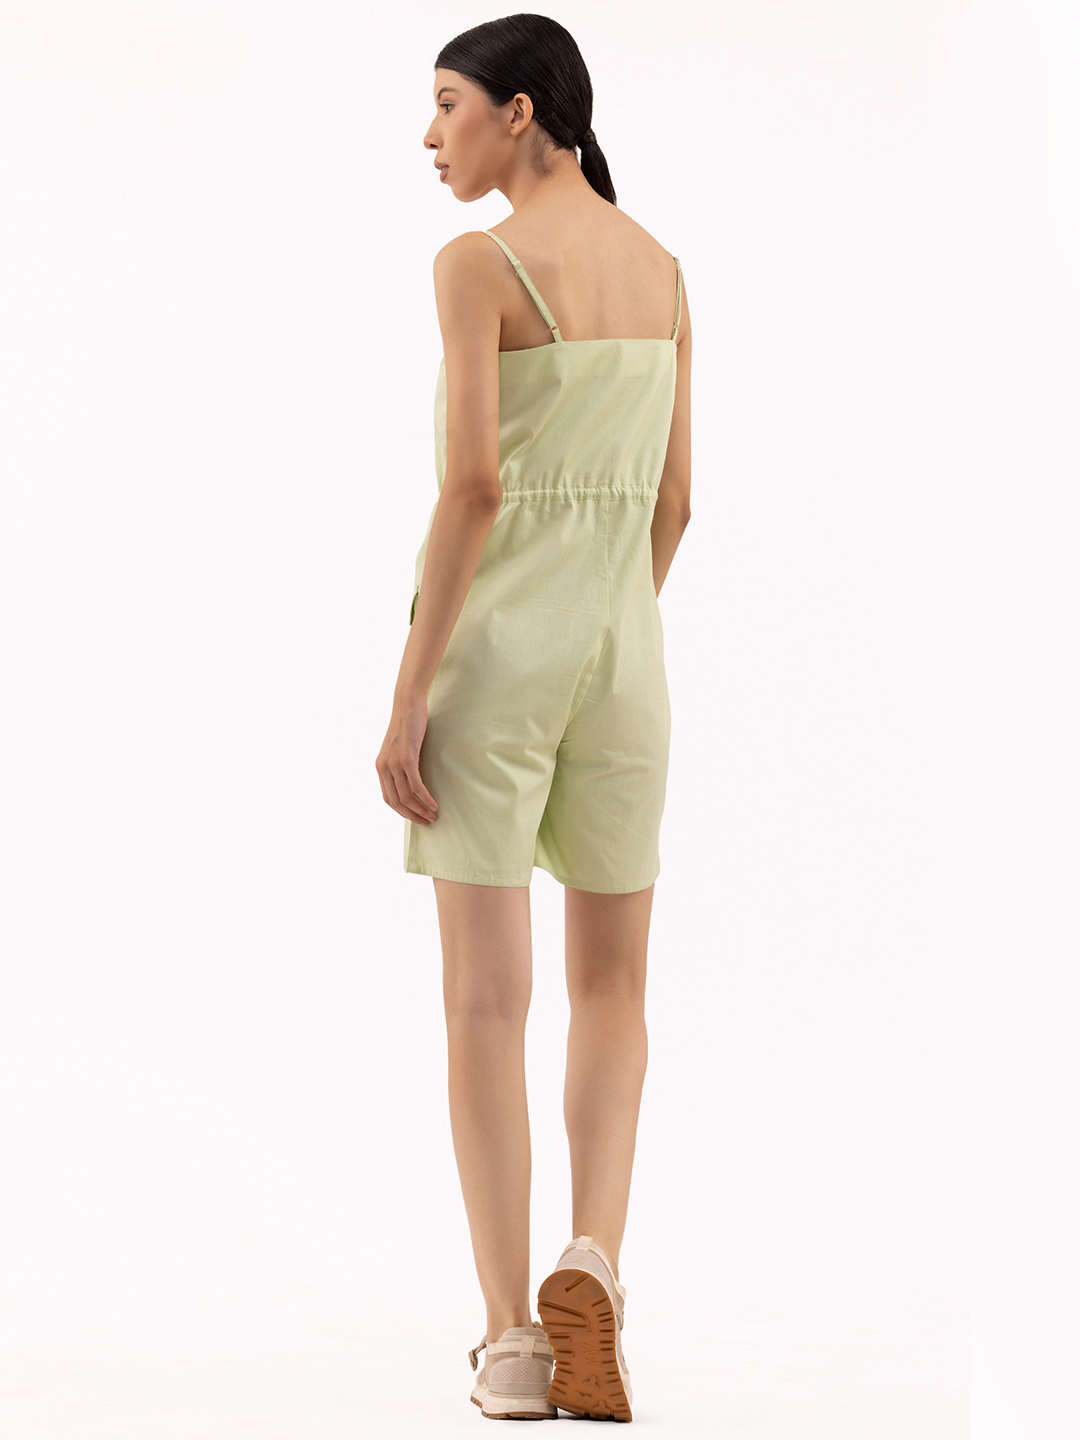 Weekend Strappy  Romper Light Lime - Back